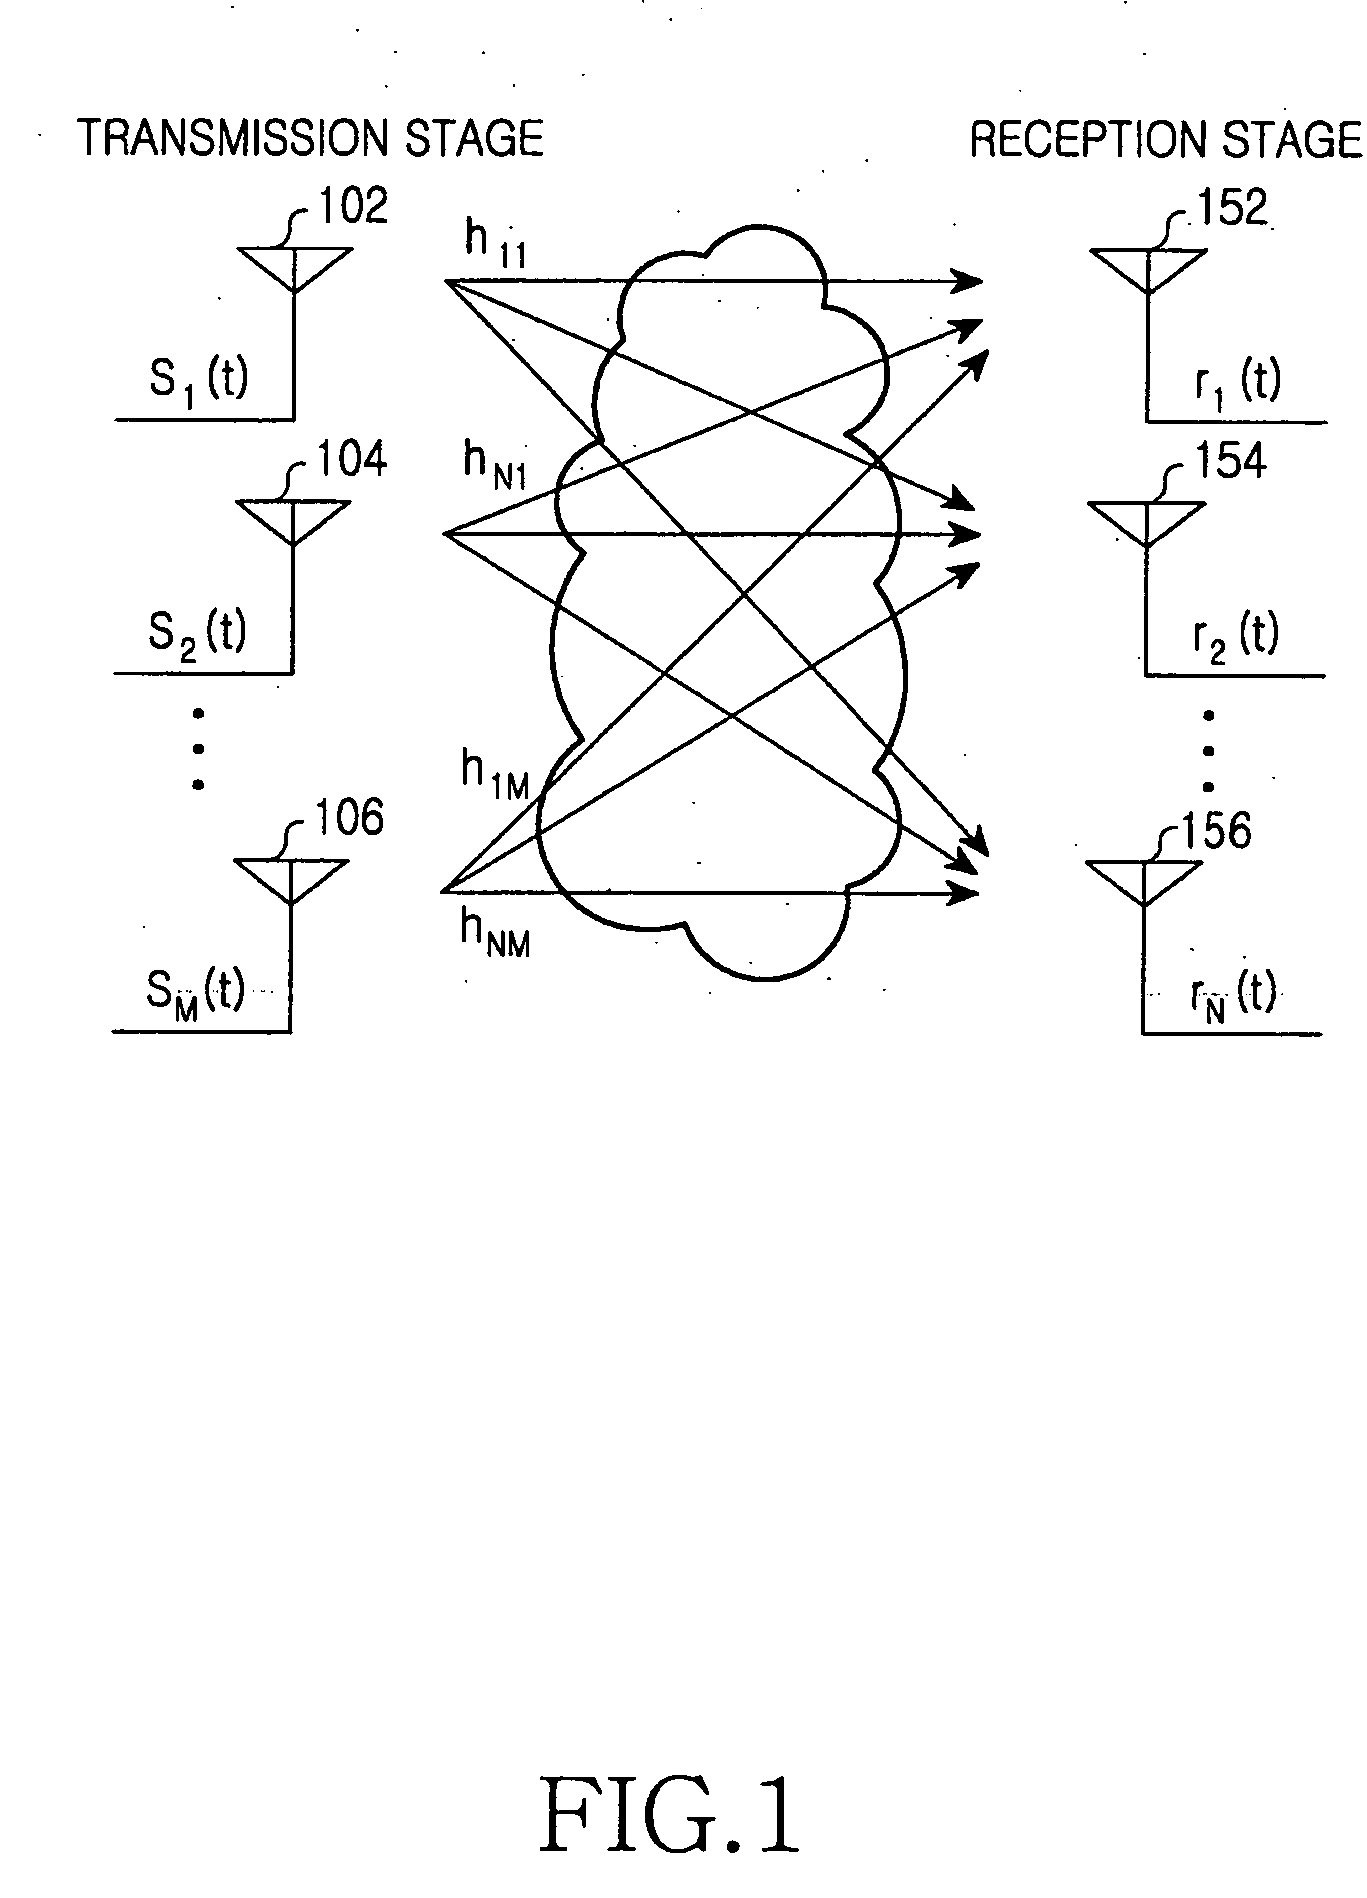 Transmitter and receiver for use in a relay network, and system and method for performing transmission and reception using the same